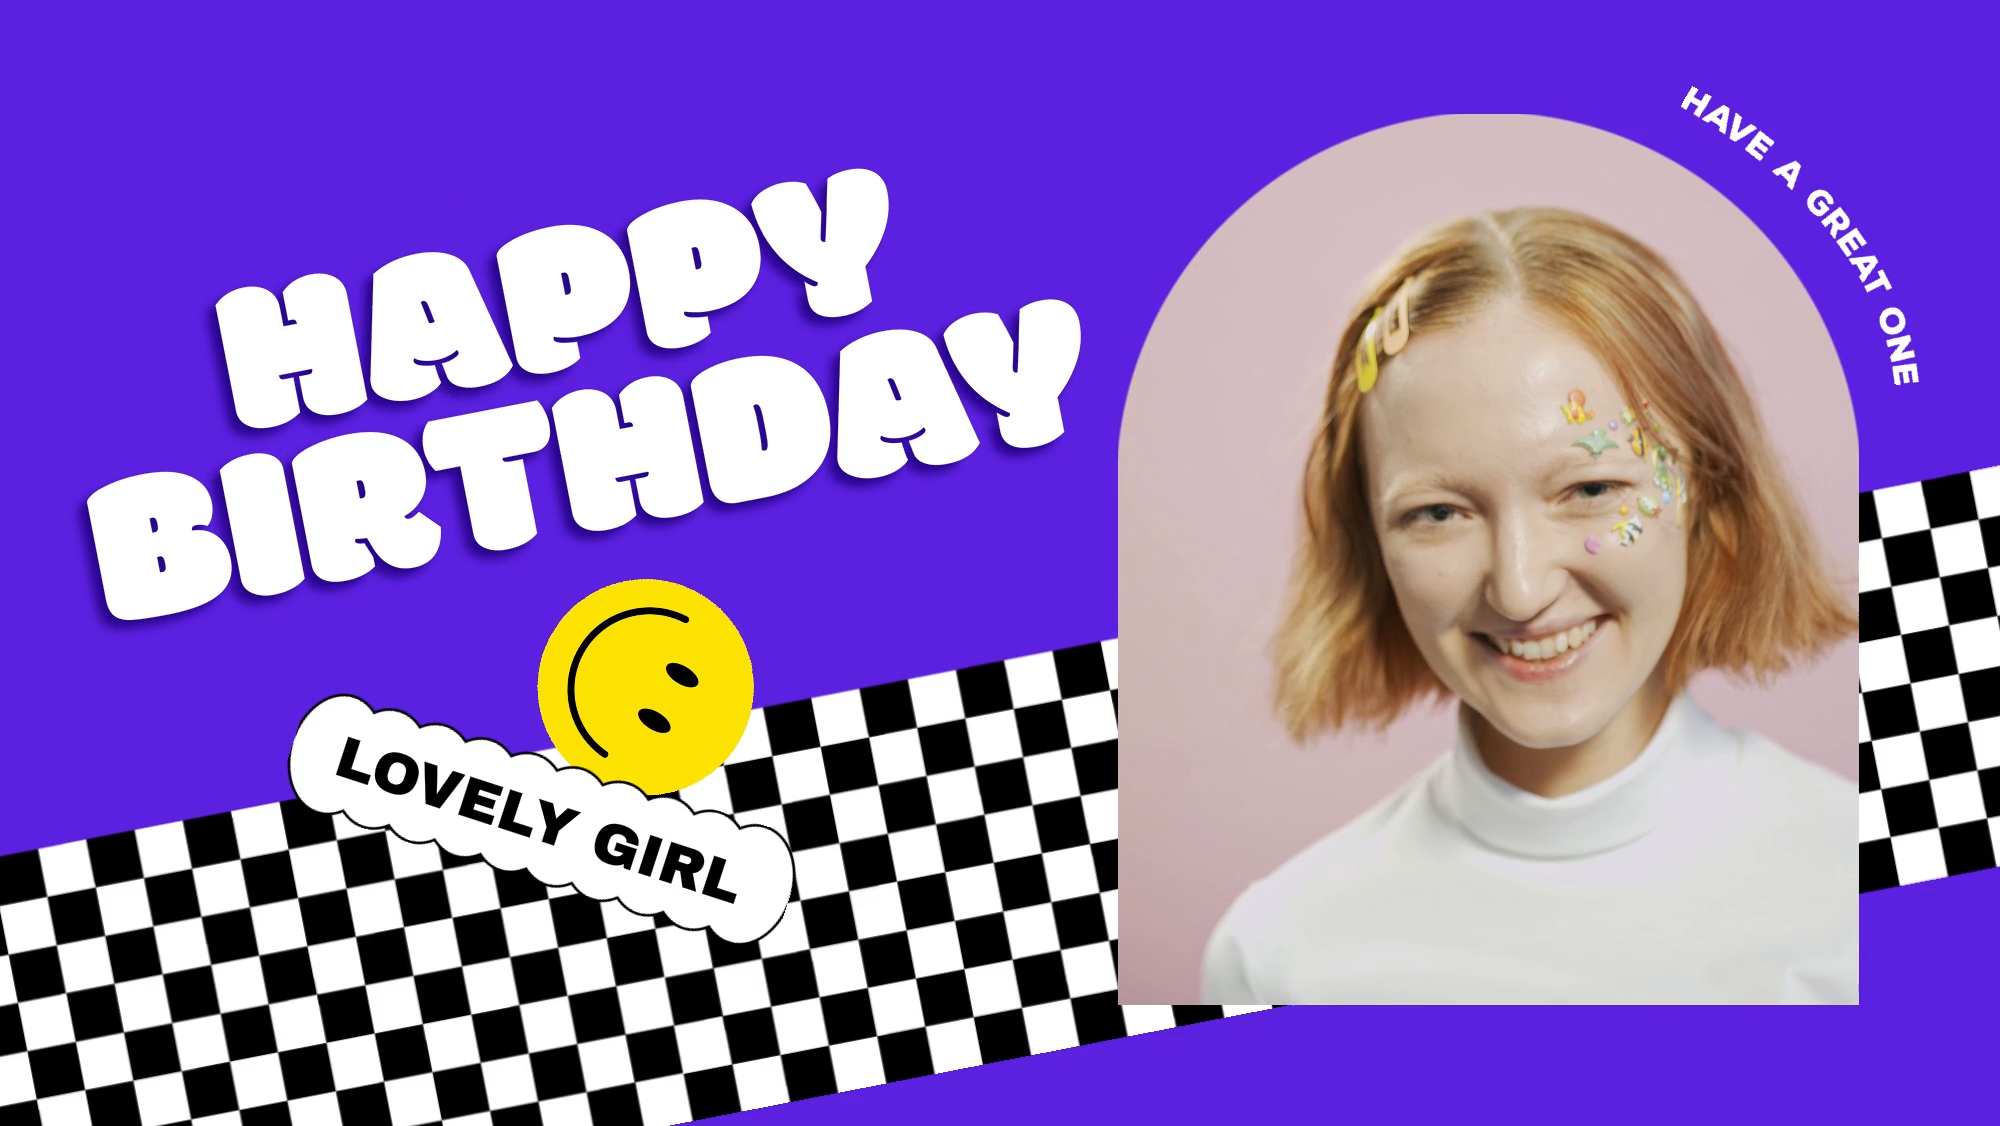 Extra Special Birthday Greeting Video Template Landscape.png